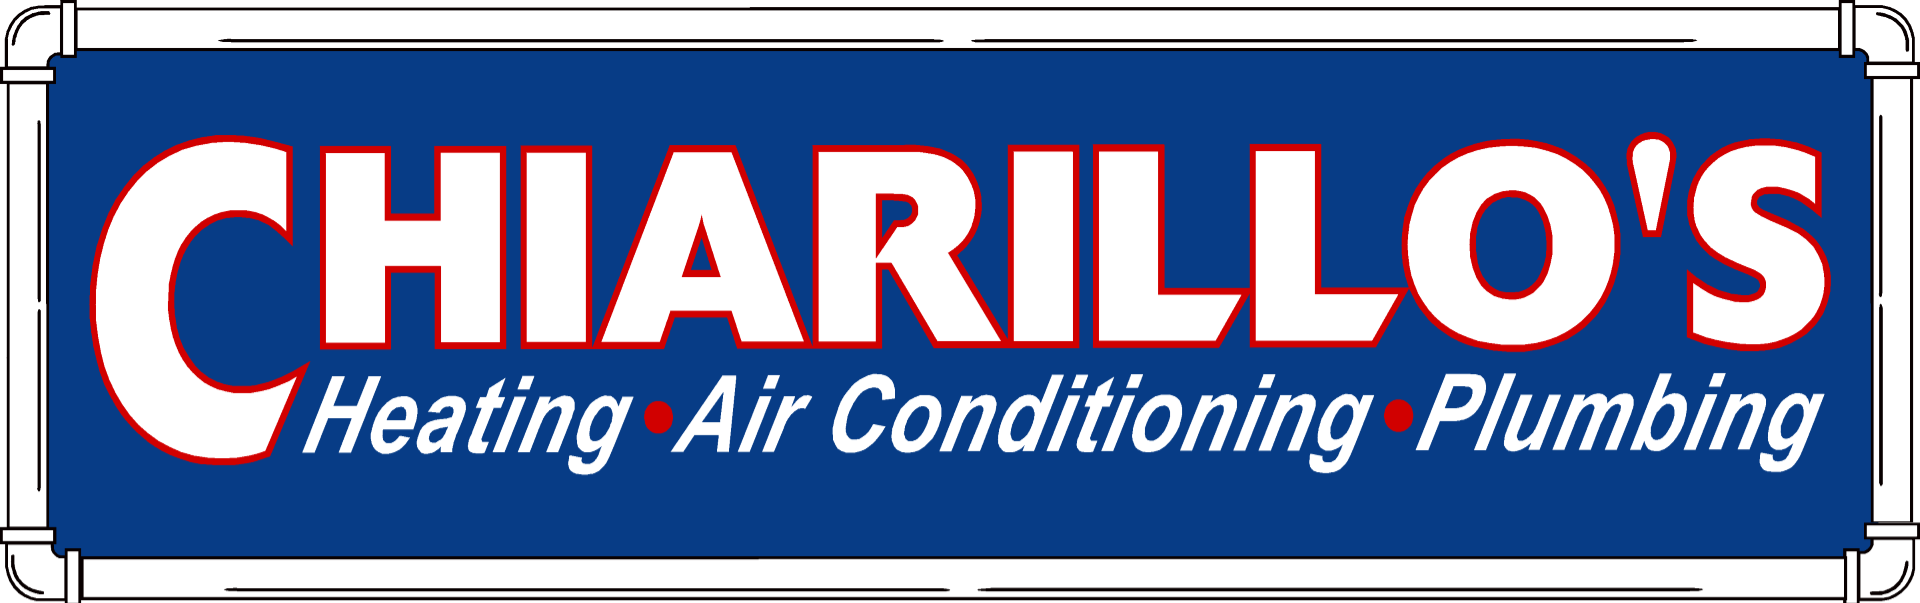 Heating & Cooling Installation & Maintenance from Chiarillo's